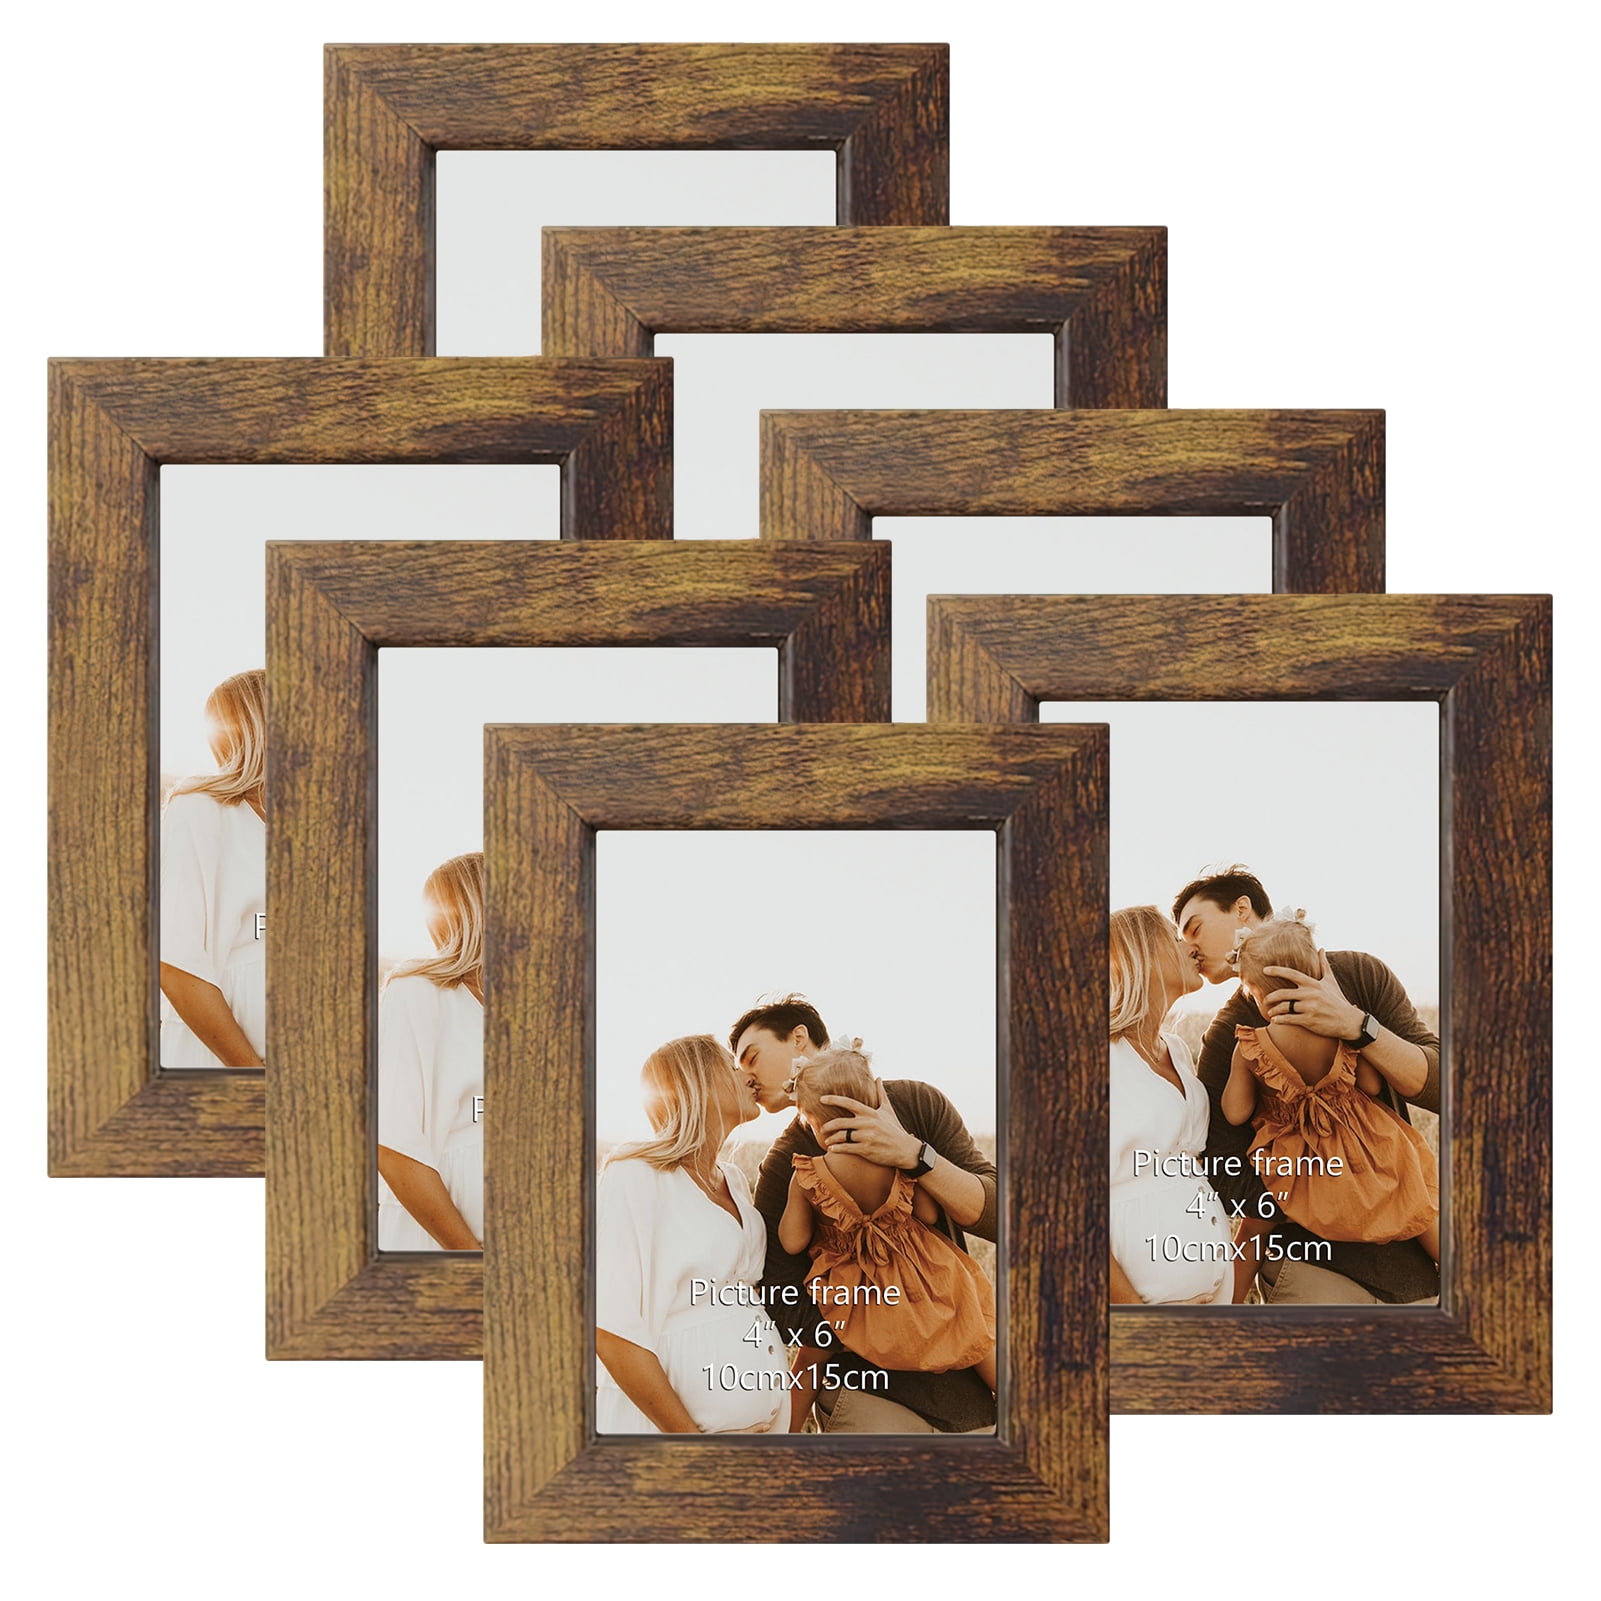 ZBEIVAN 2 Pack 4x6 Picture Frames Set Vintage Brown Art Rustic Photo Frame for Tabletop Stand or Wall Hanging